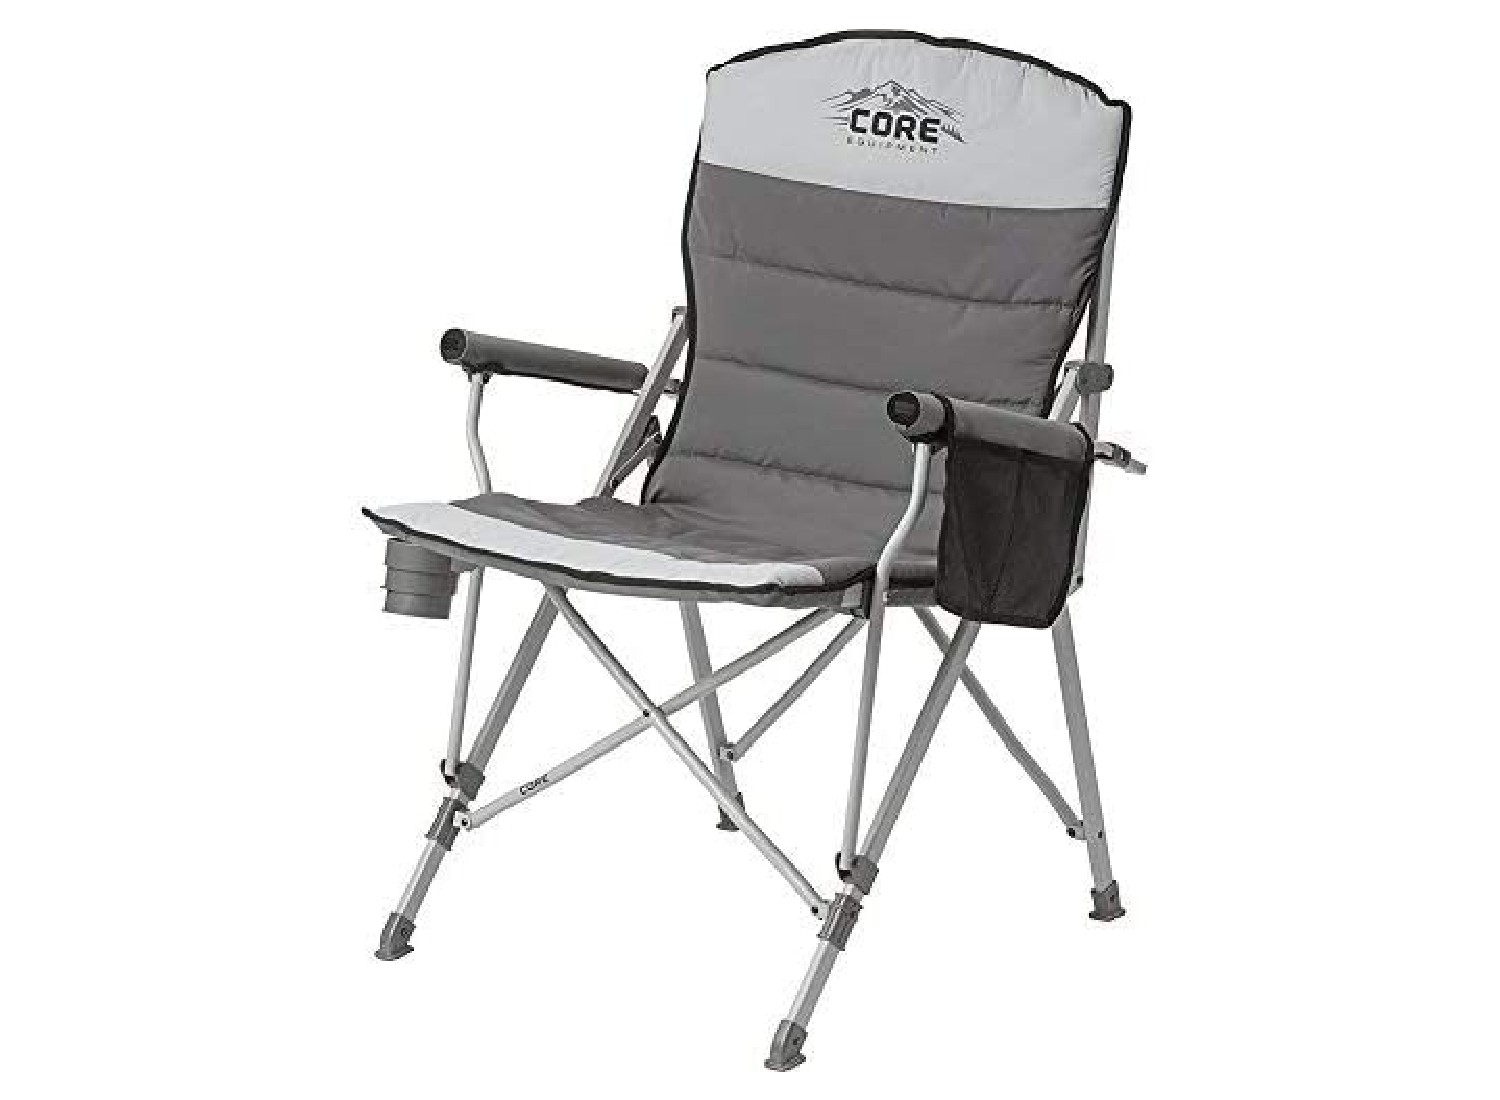 Best Outdoor Folding Chairs In 2021, What Is The Best Outdoor Folding Chair